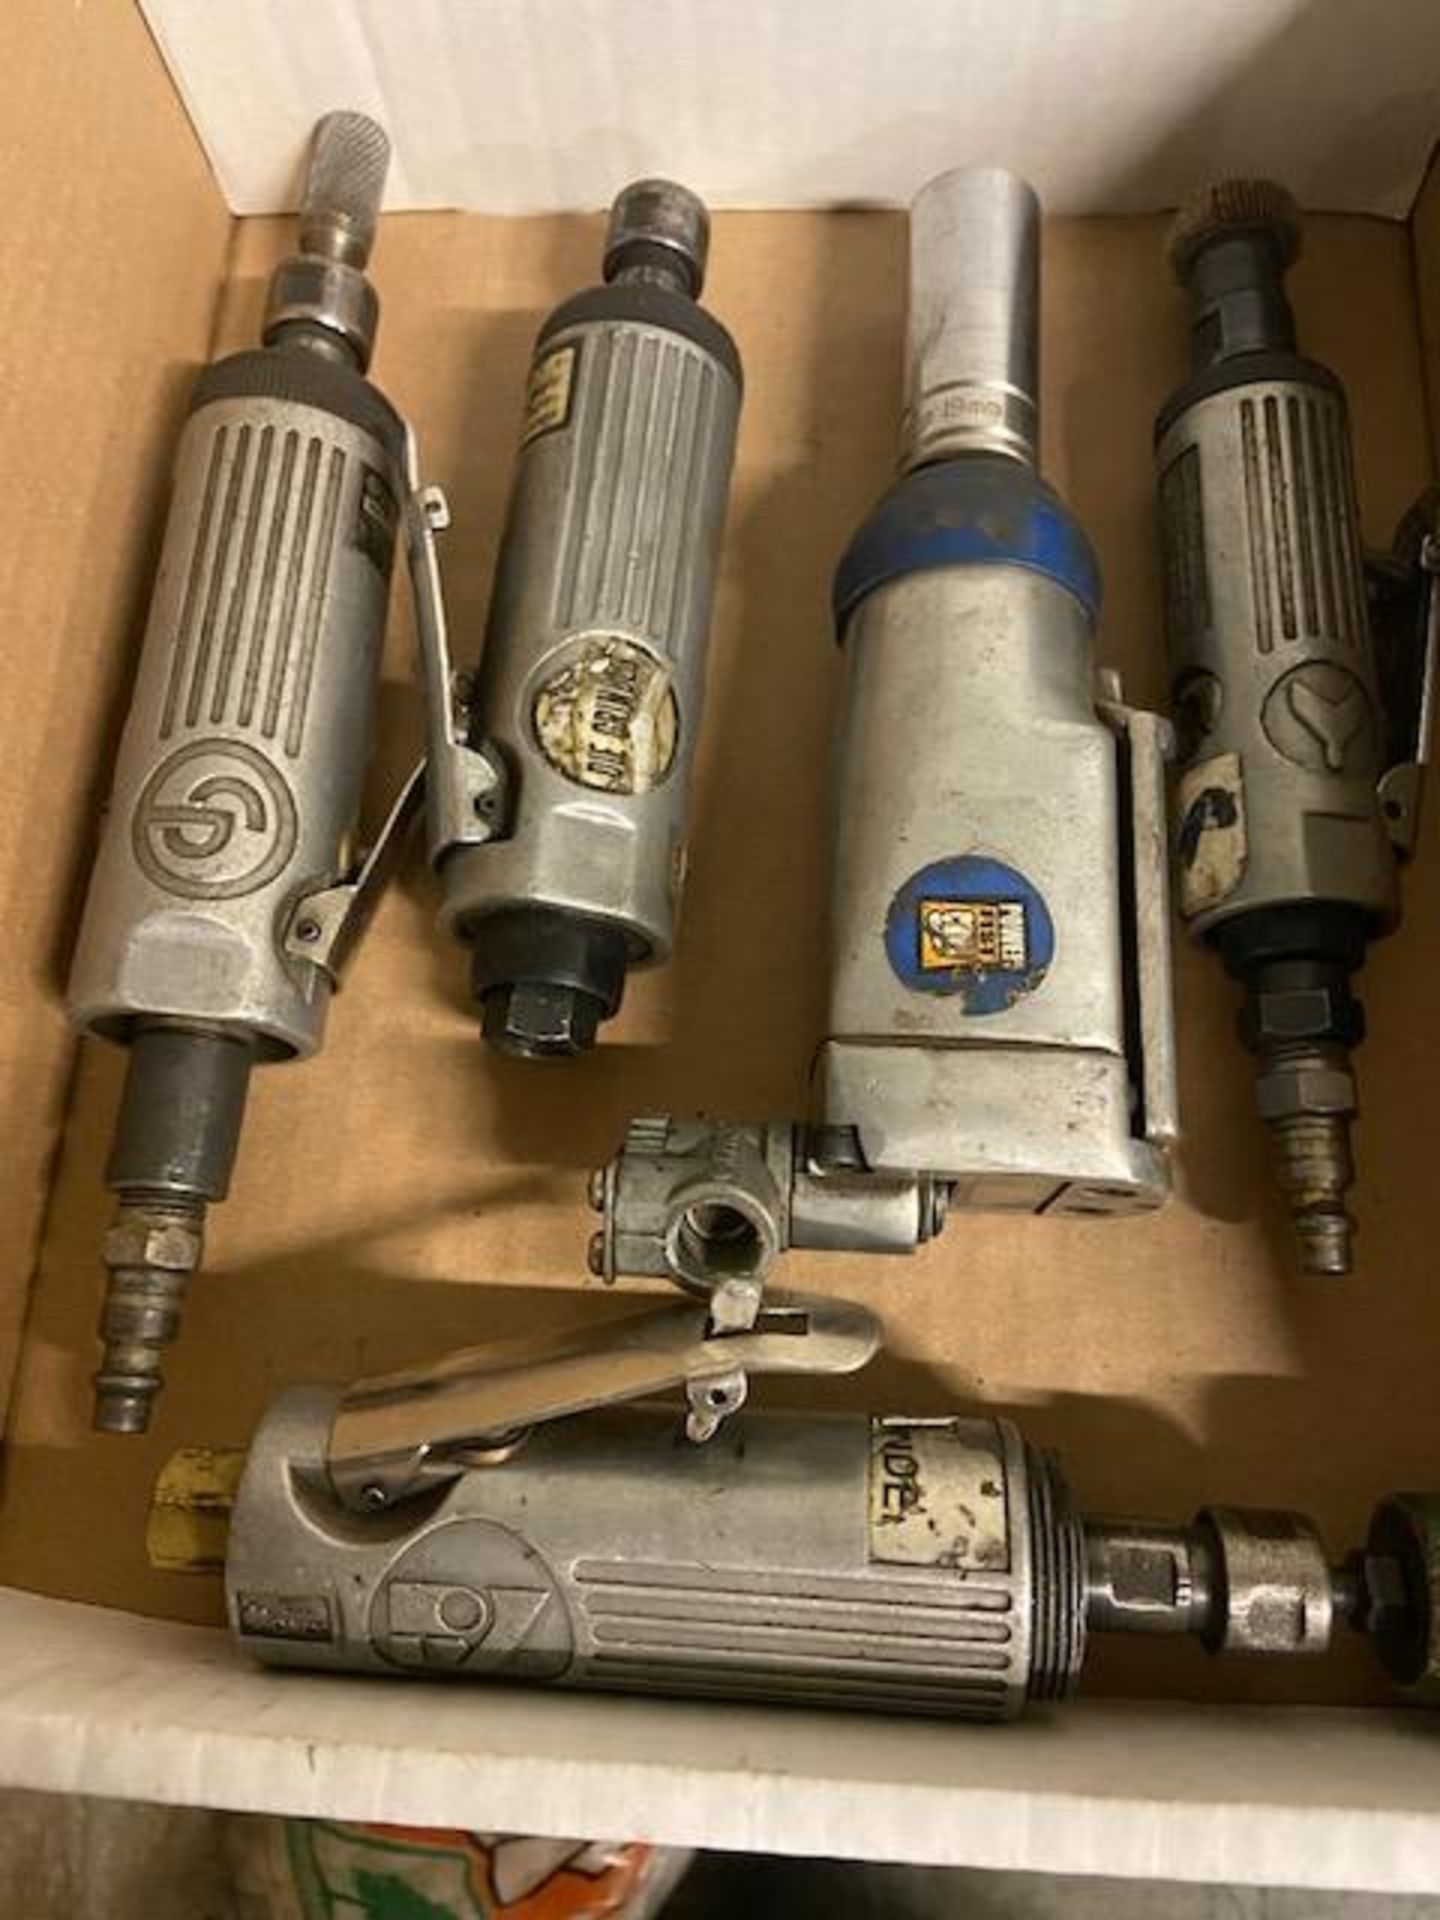 Lot of 5 units Air Die Grinder units CP and JET